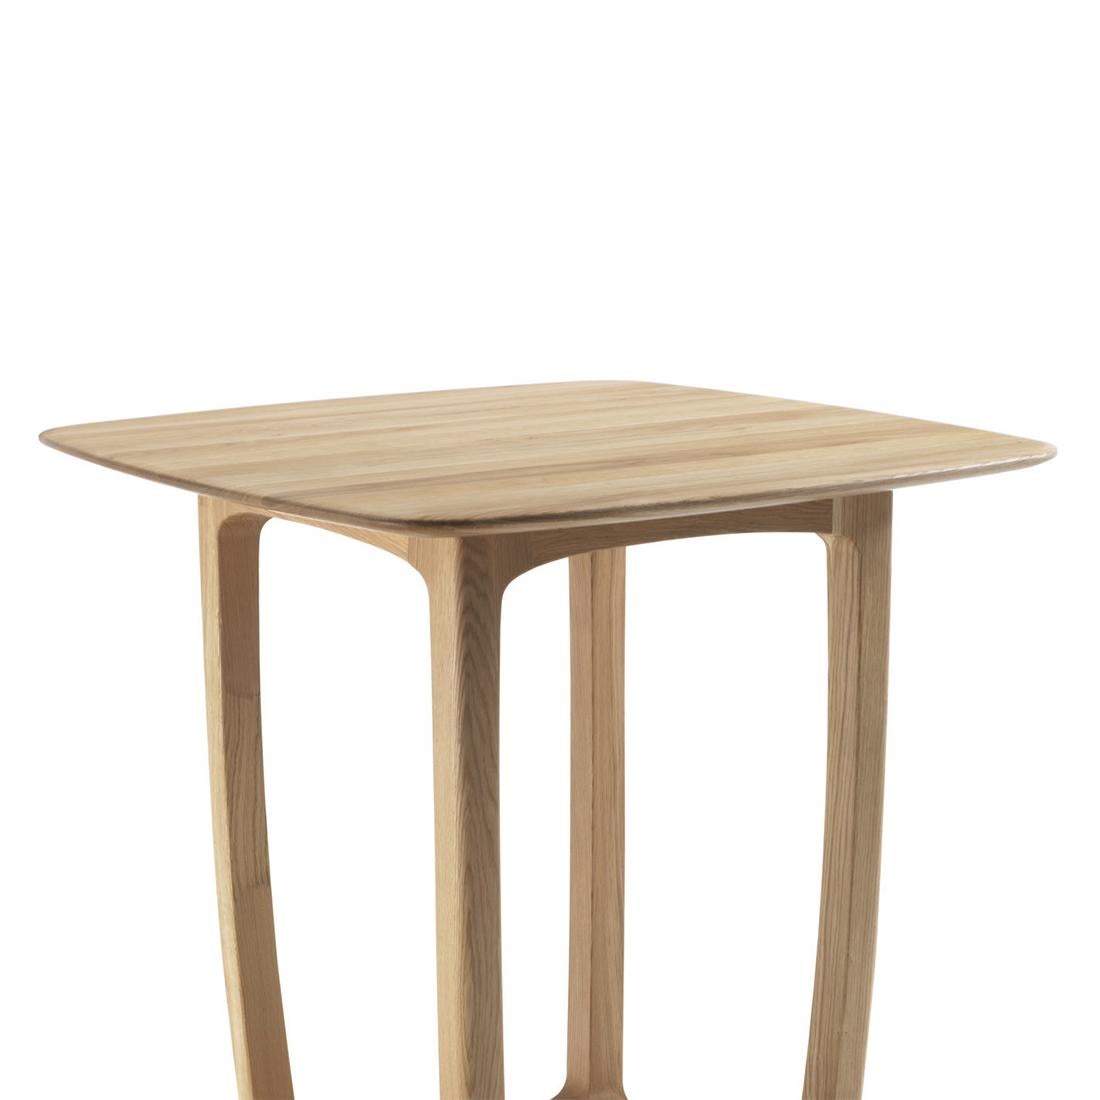 Center table trooper oak with structure in
solid oak, with solid oak top.
Wood treated with natural pine extracts wax.
Also available in solid walnut wood.
Available in:
L 100 x D 100 x H 103.5cm, price: 5900,00€.
L 120 x D 120 x H 103.5cm, price: